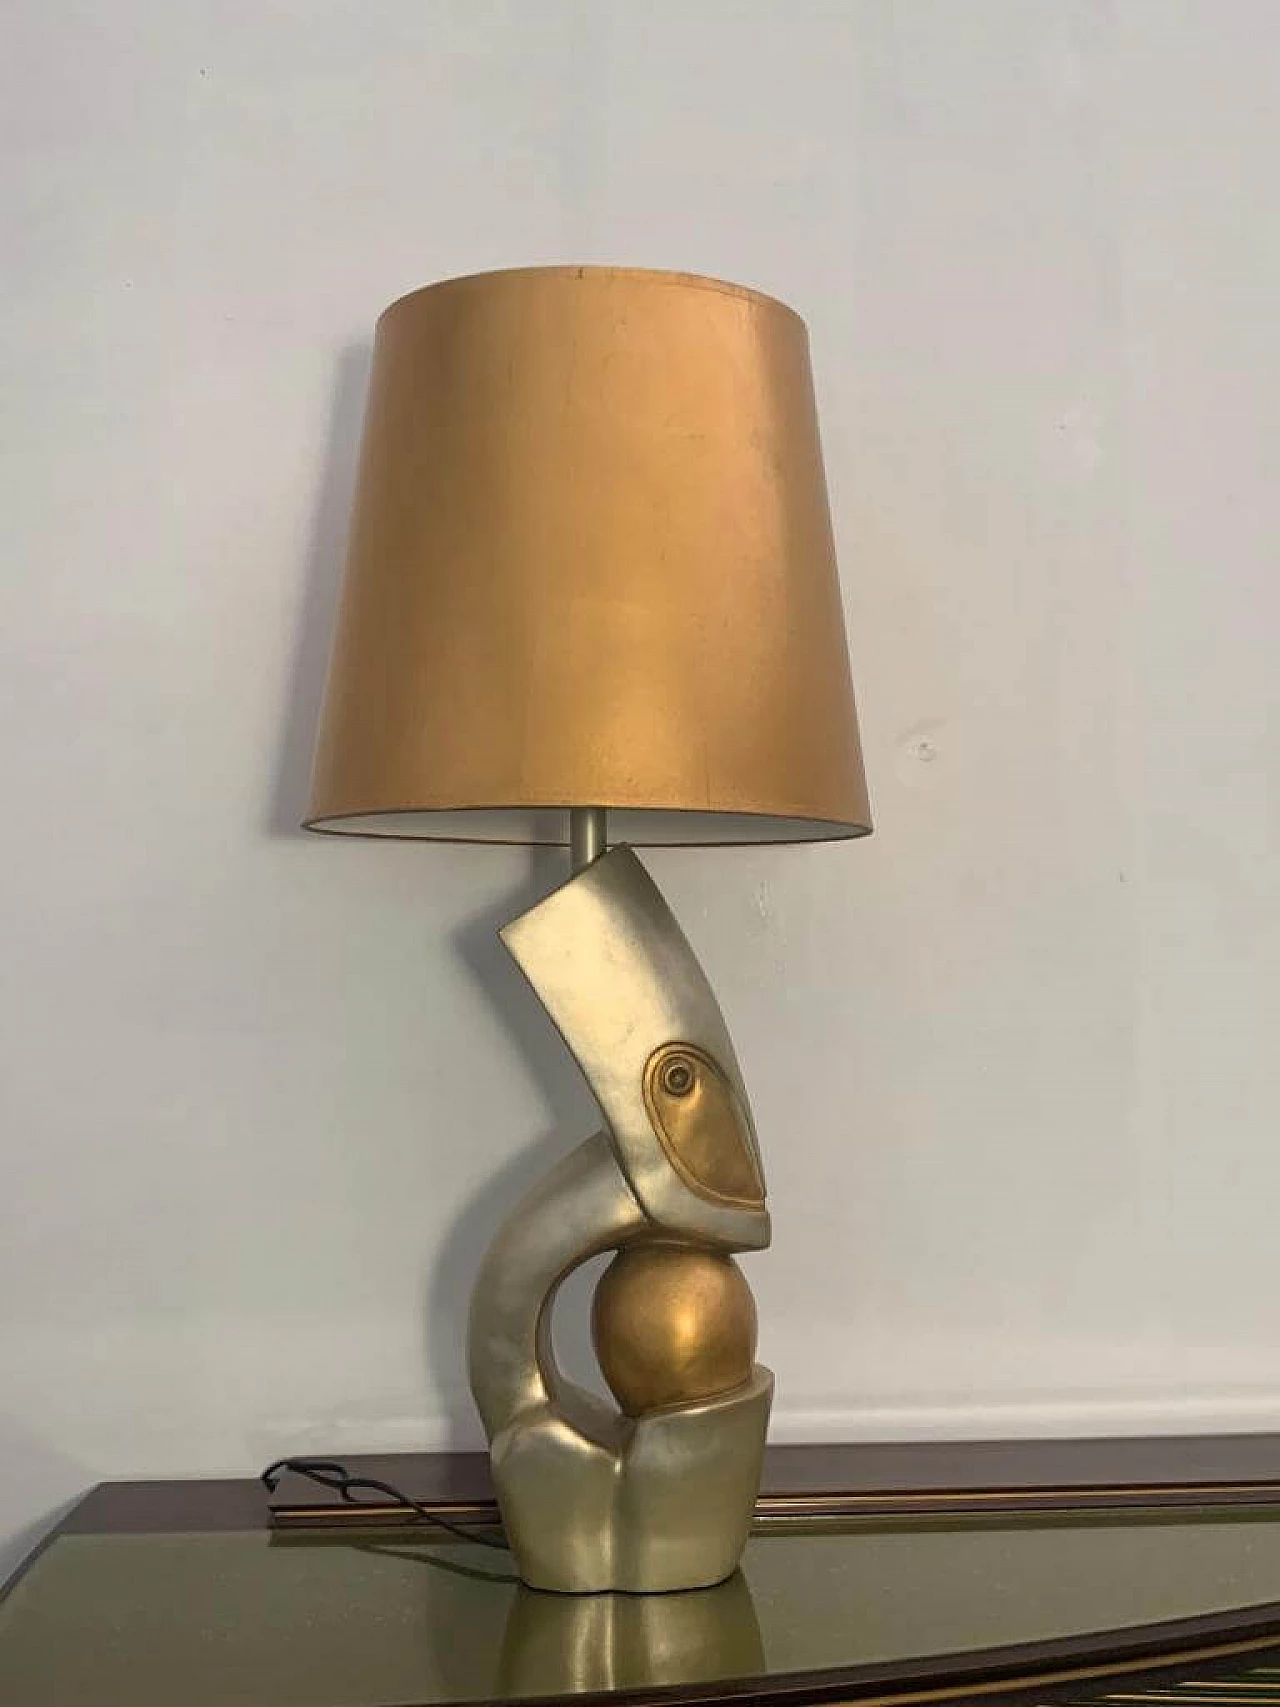 George table lamp by Leeazane for Lam Lee Group Dallas, 1990s 1197671